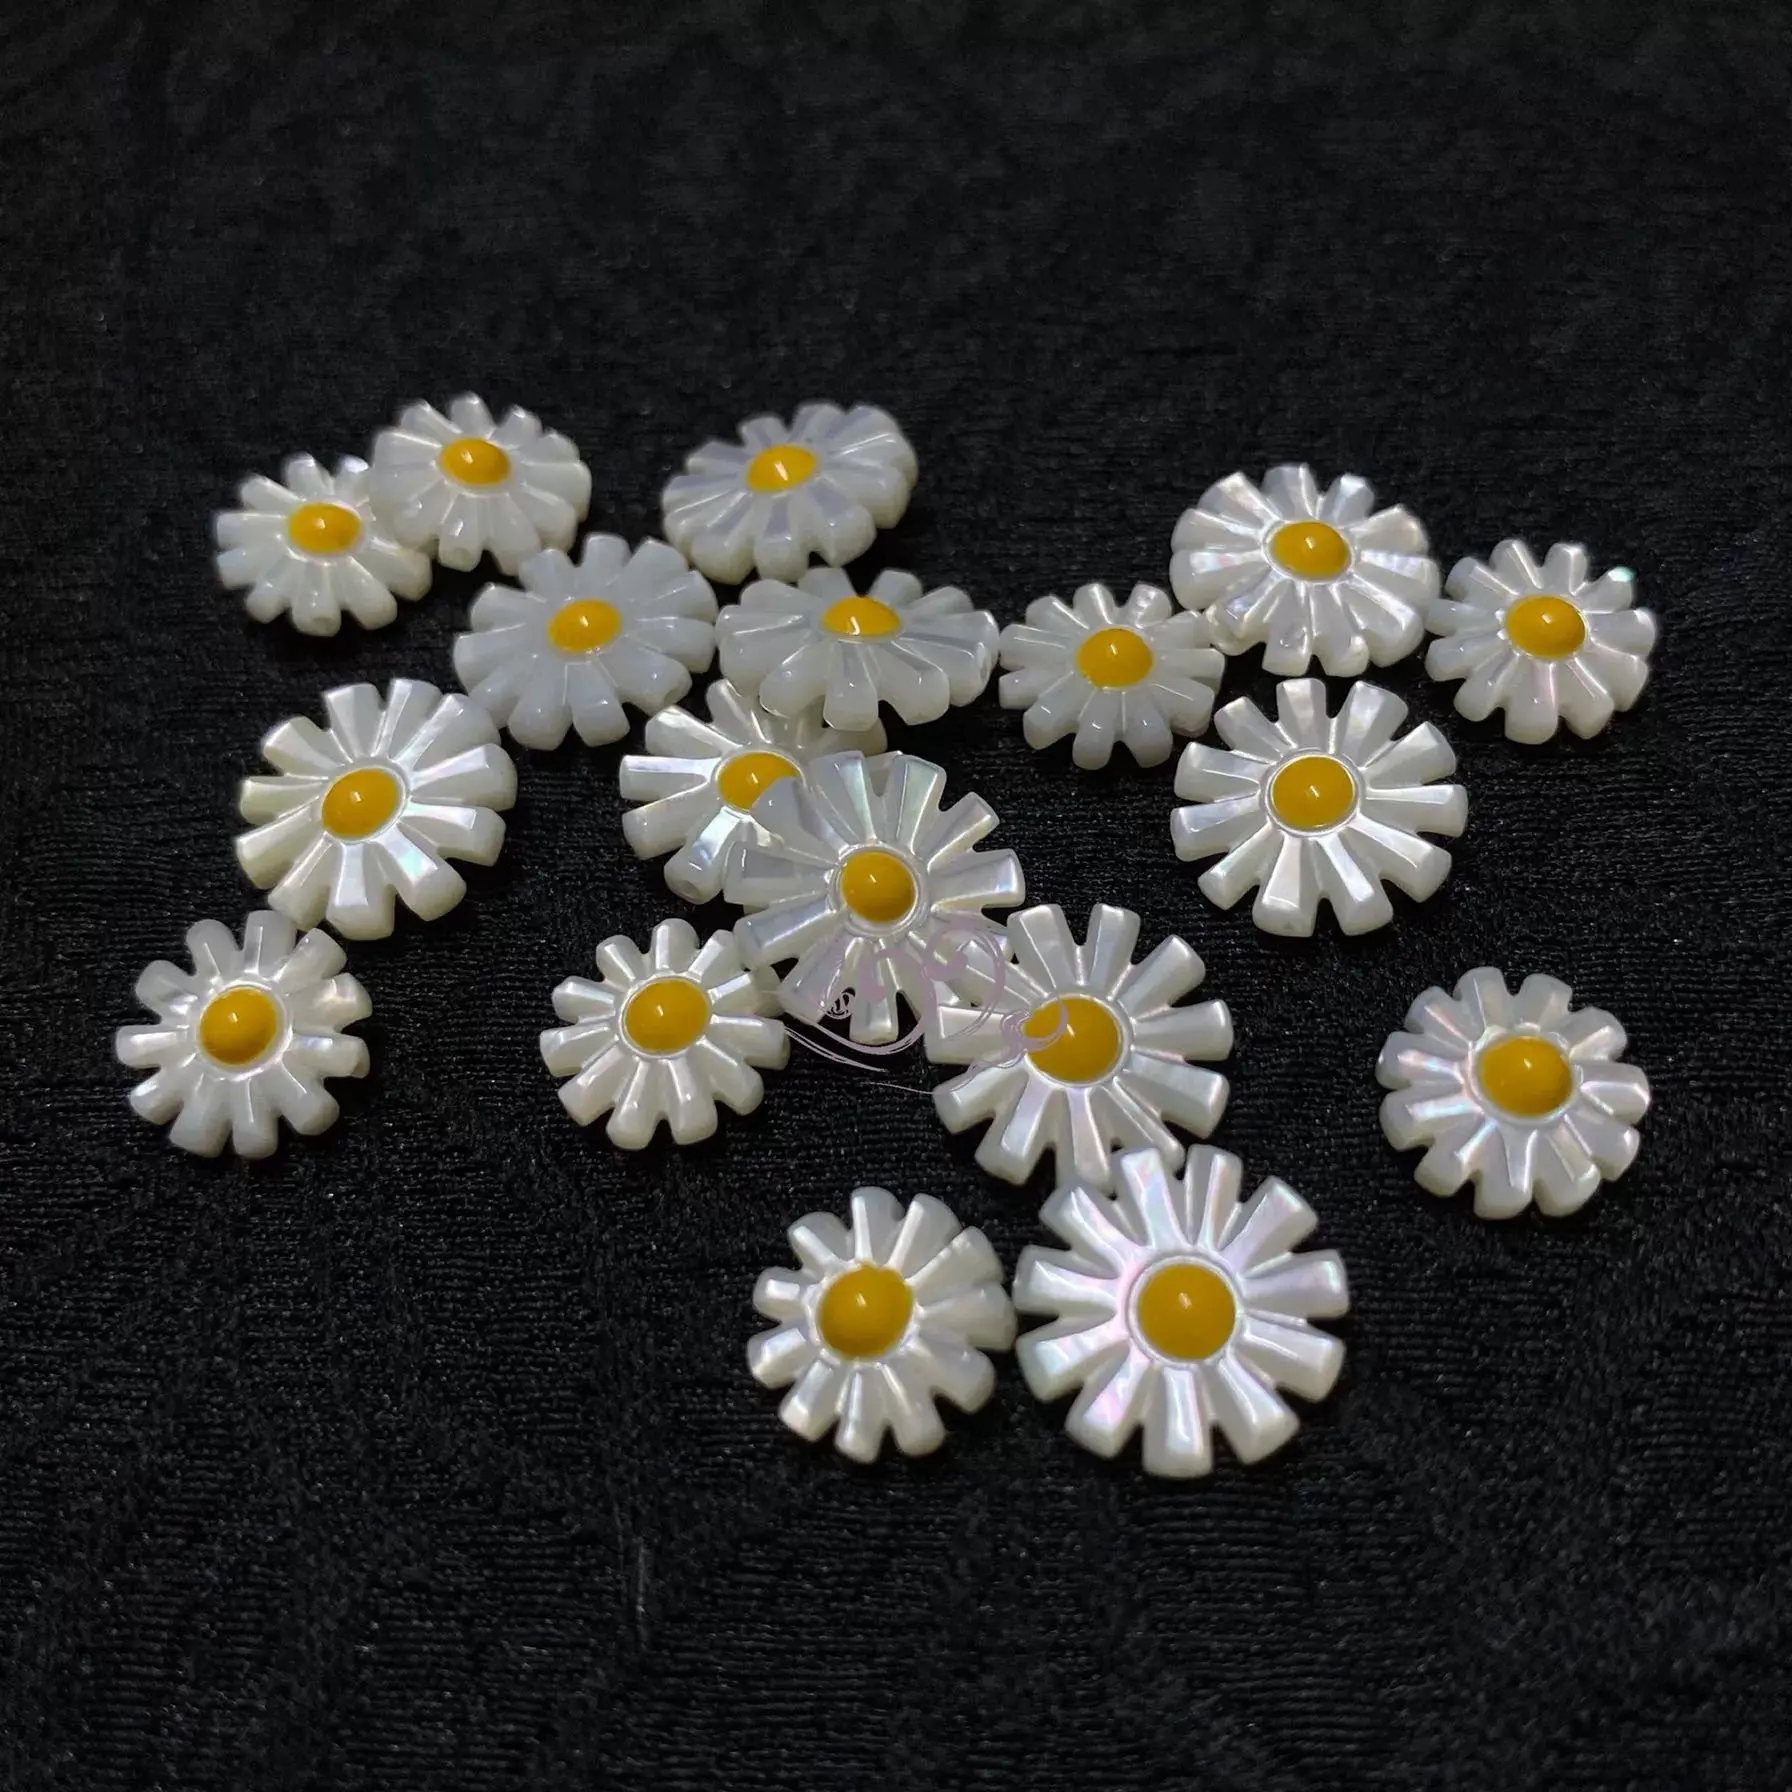 Natural Craft Flower White Mother of Pearl Shell 10mm Daisy Bellis Perennis Charm Bracelet for Jewelry